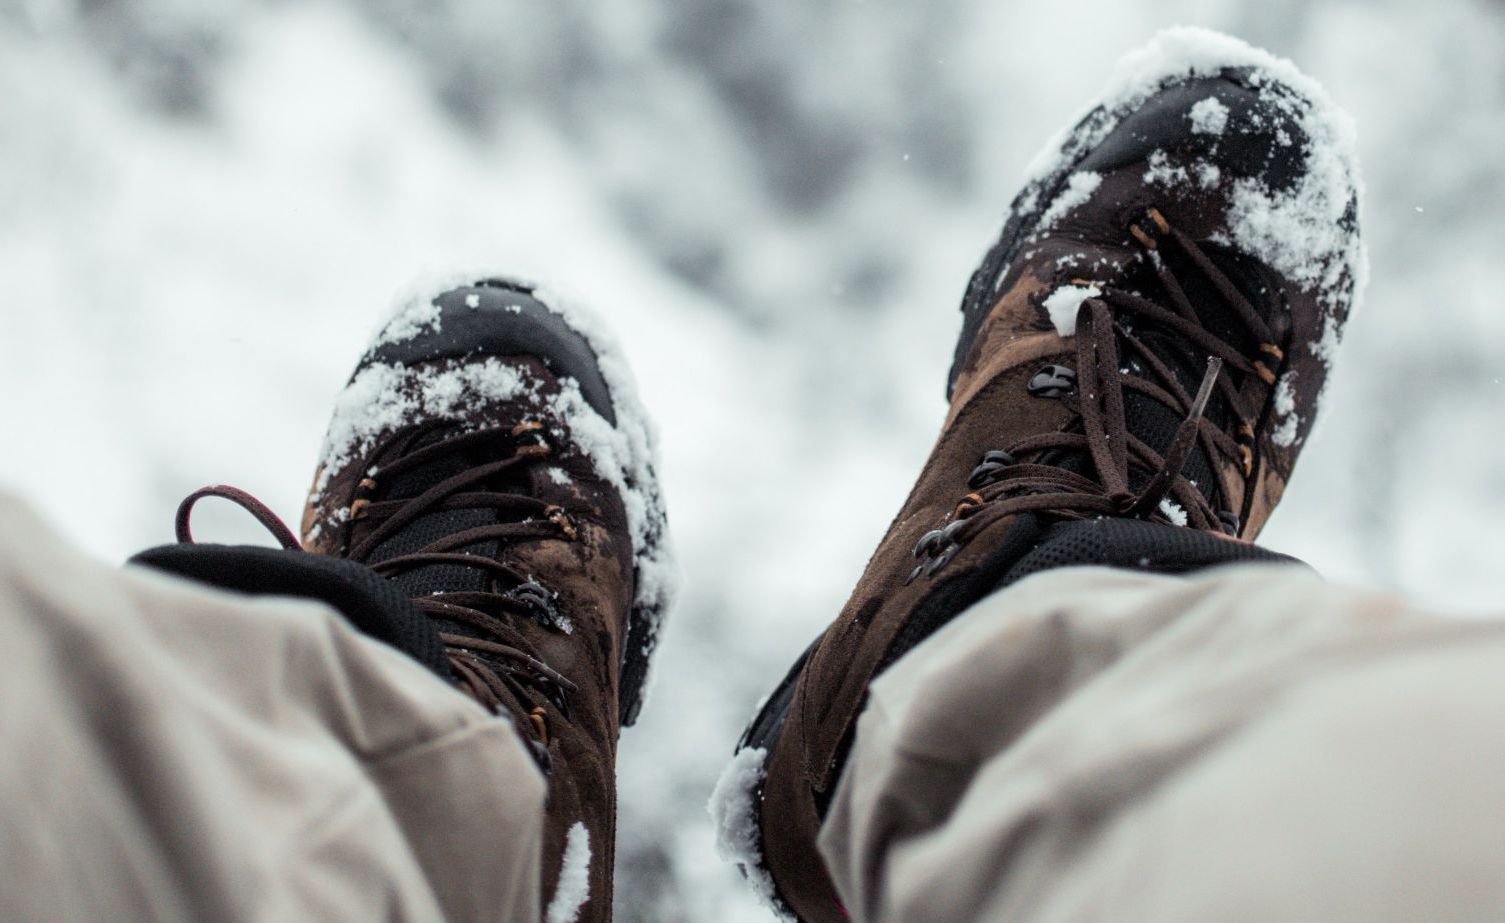 Winter hiking boots covered in snow - no concerns, if you've bought the right boots.